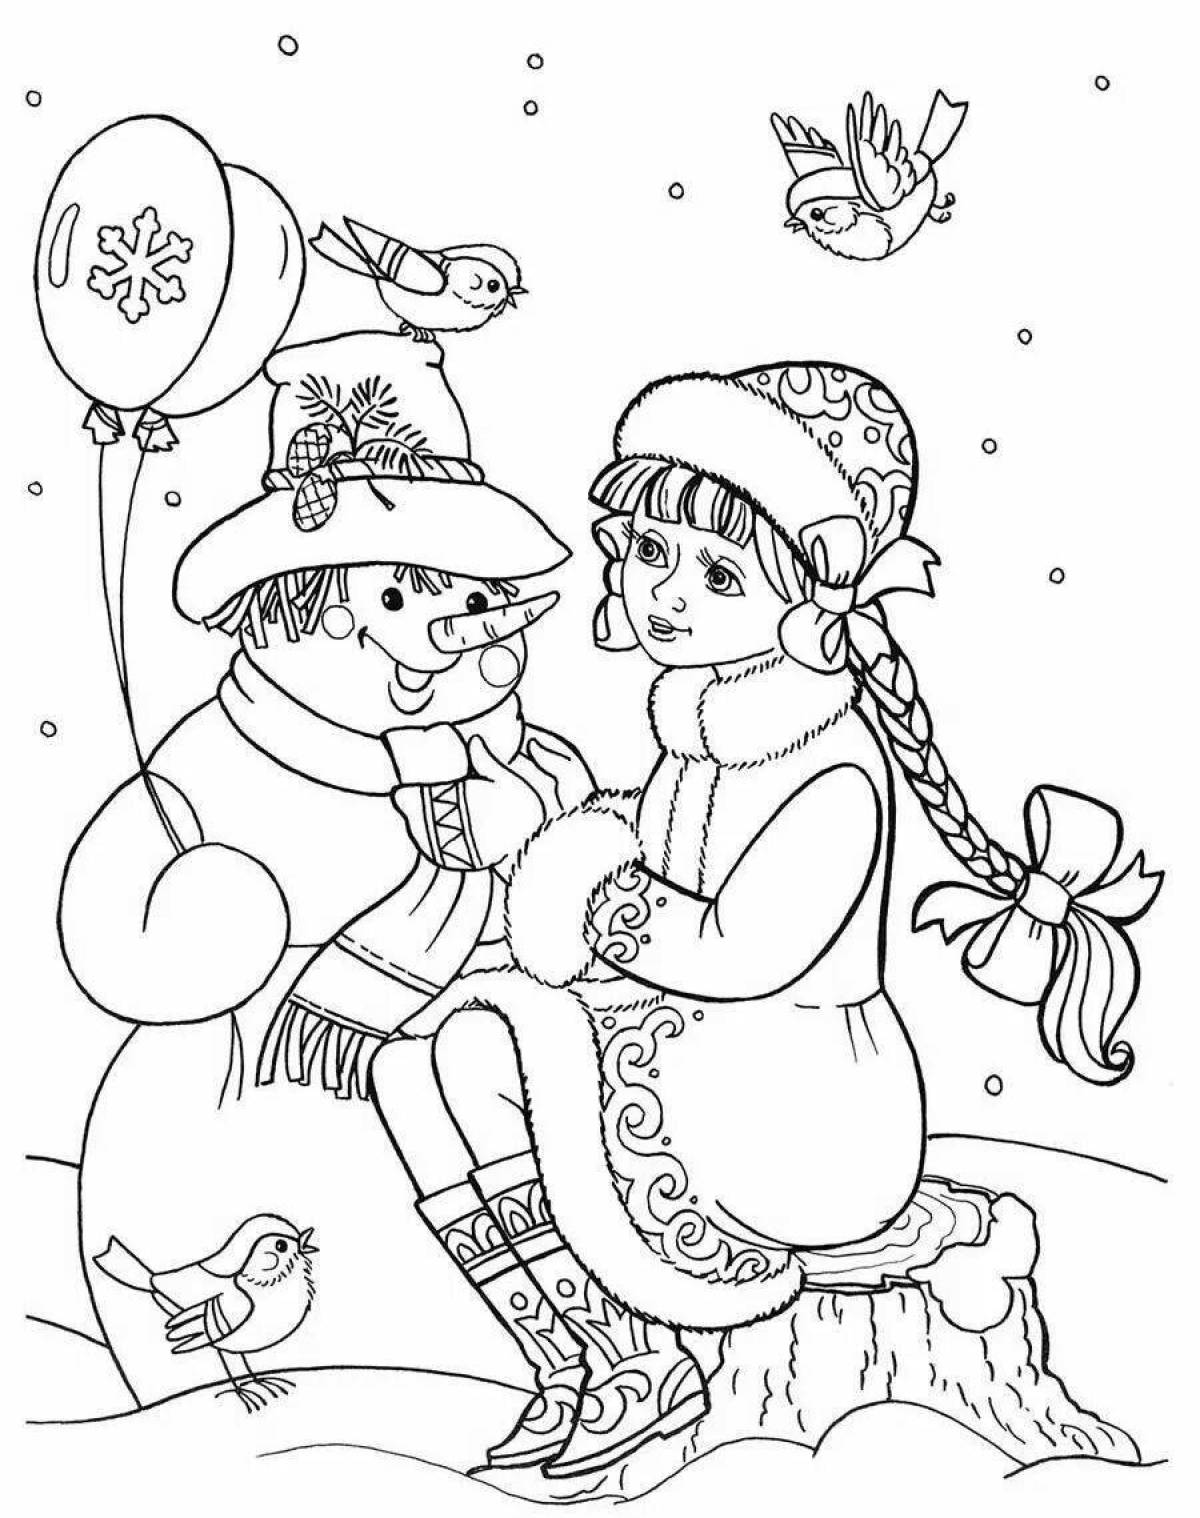 Glowing snow maiden coloring page